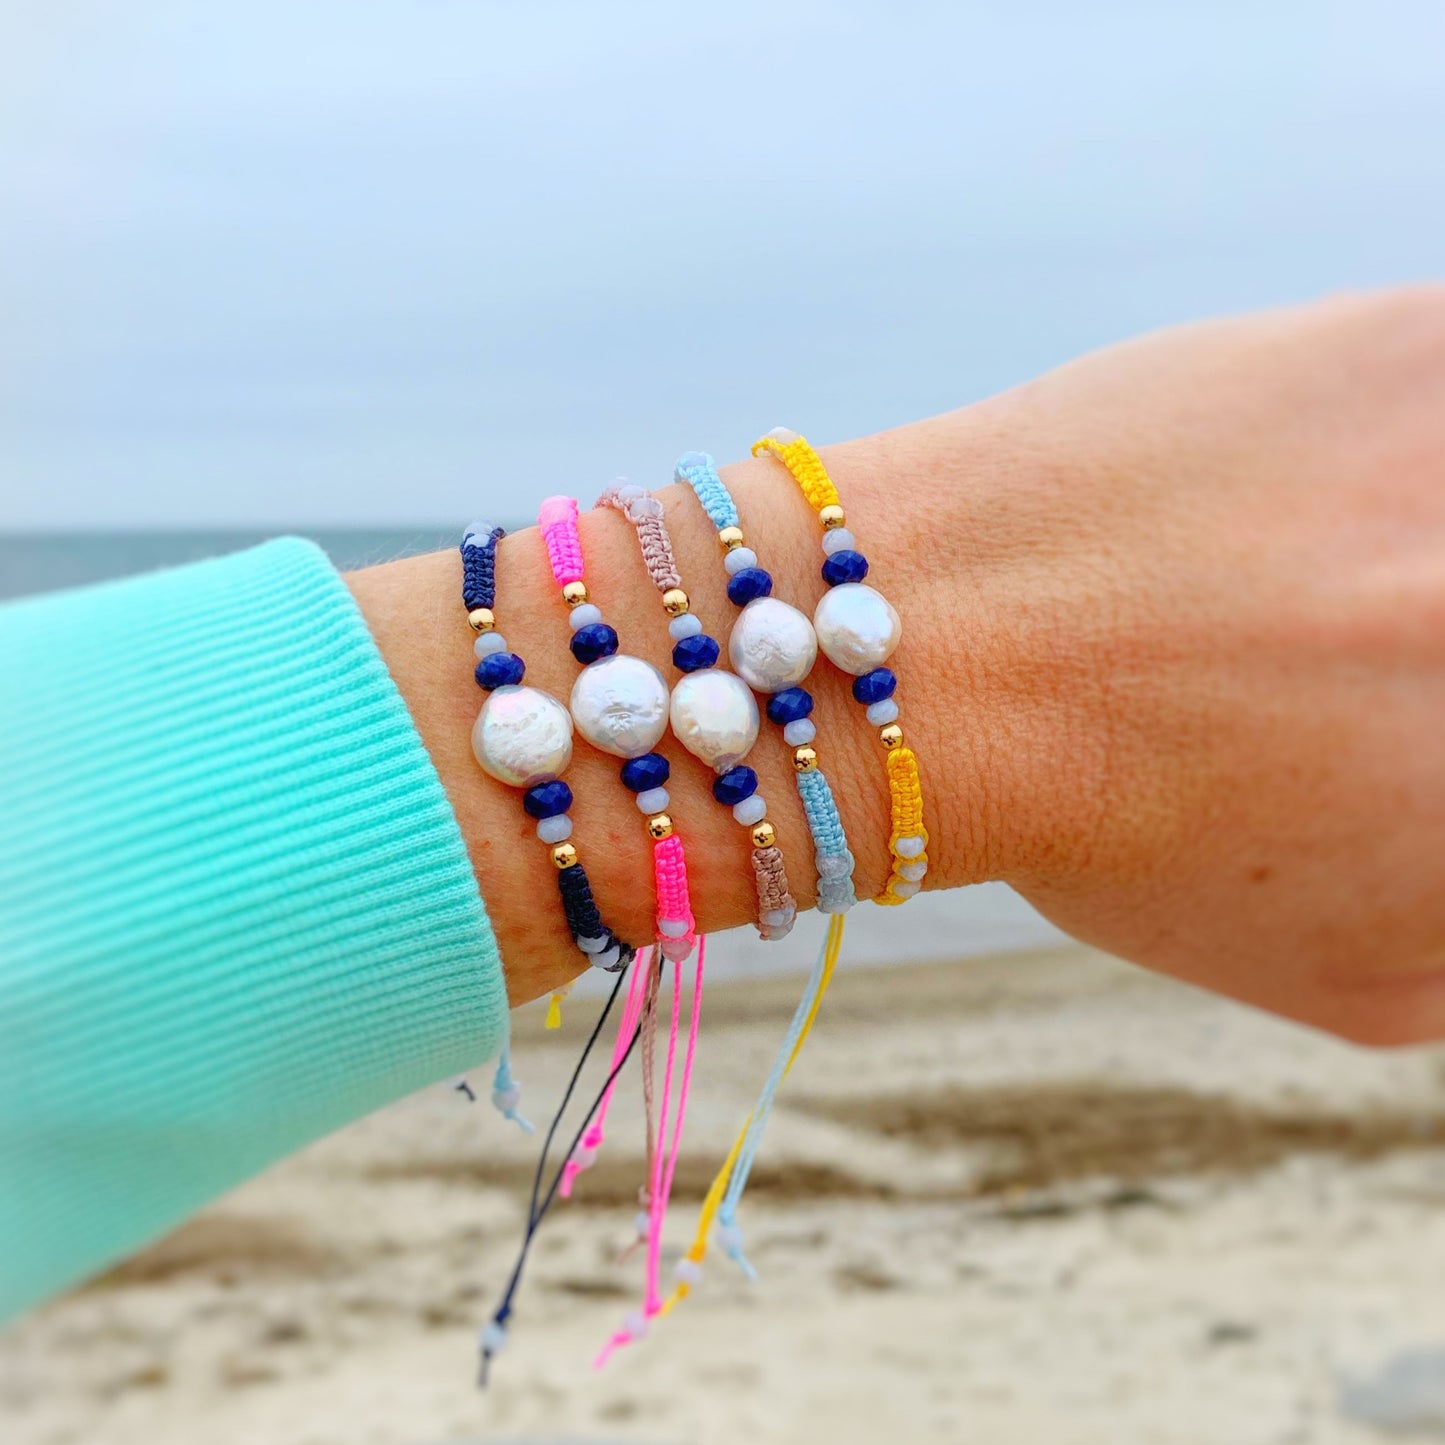 Bristol macrame bracelets by mermaids and madeleines have a freshwater pearl and semiprecious beads at the center and a 14k gold filled slide bead closure. Here is a photograph of all four bristol bracelets worn stacked on a wrist with the beach and ocean in the background